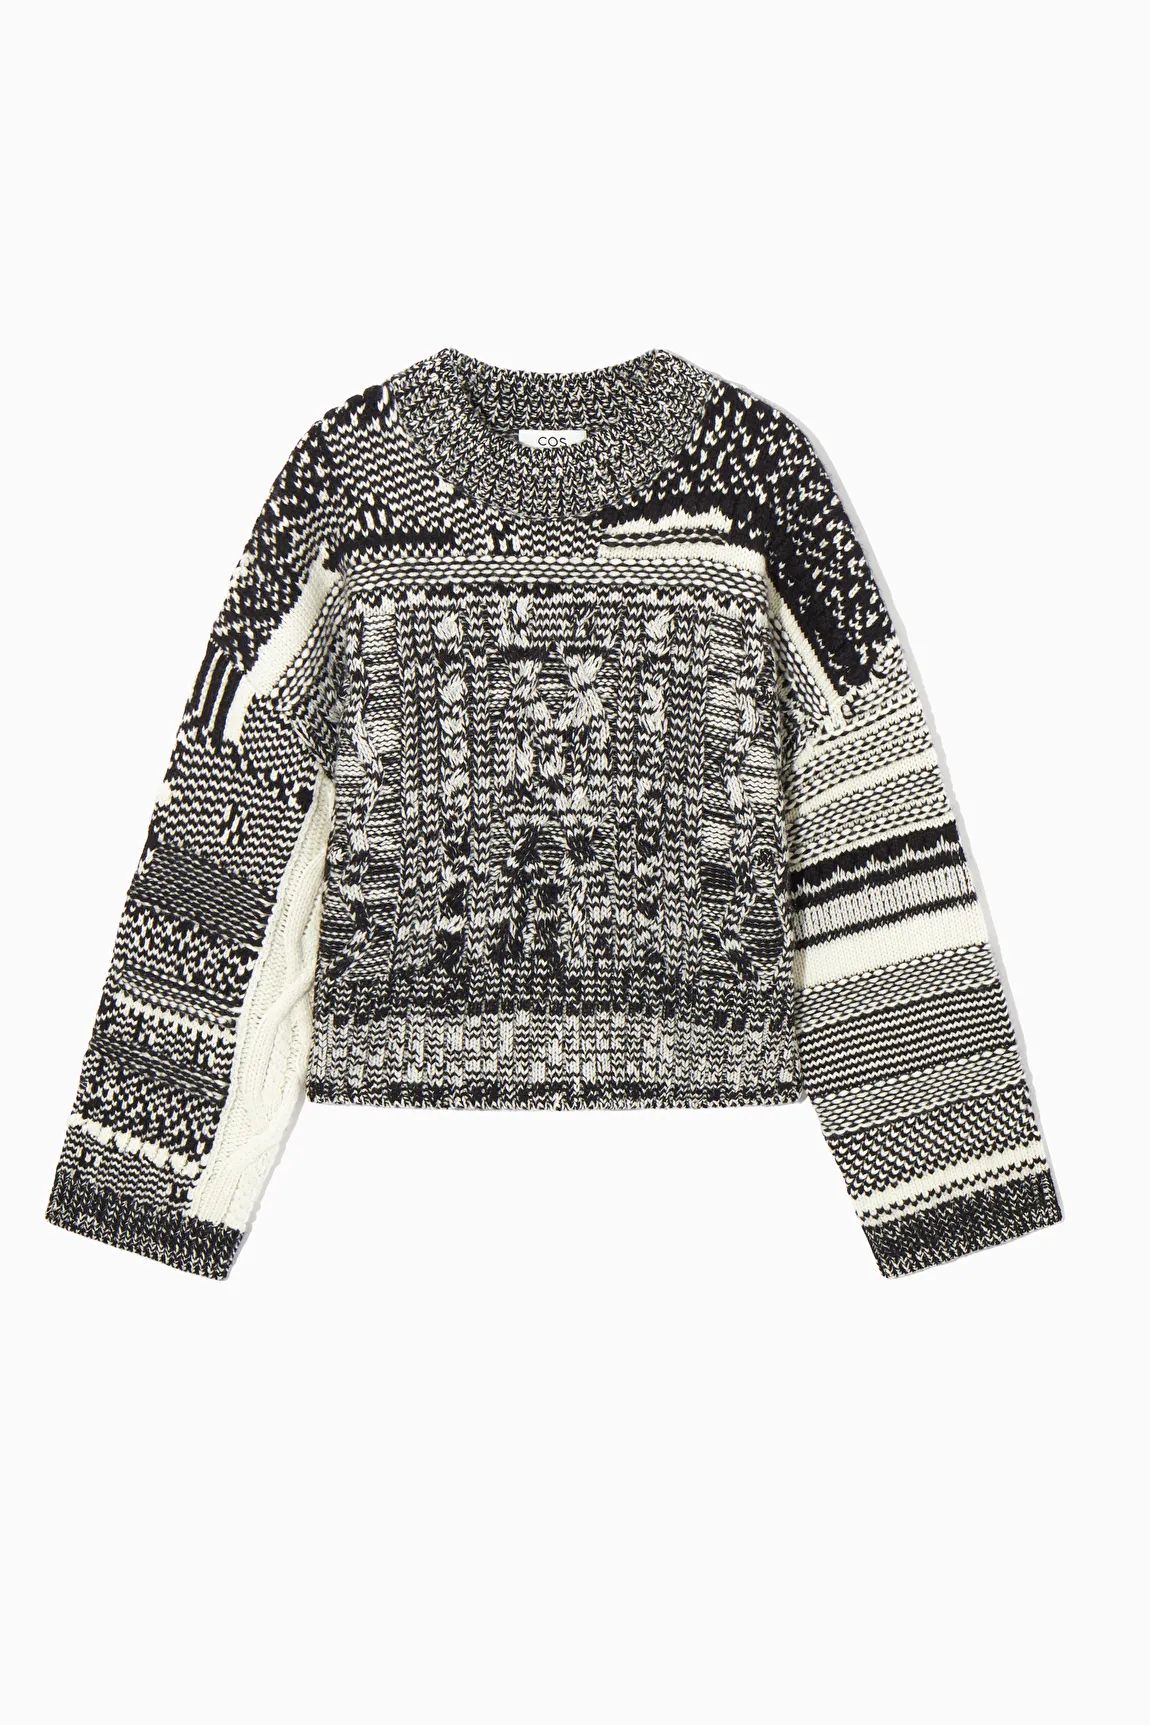 FAIR ISLE WOOL AND CASHMERE JUMPER | COS UK